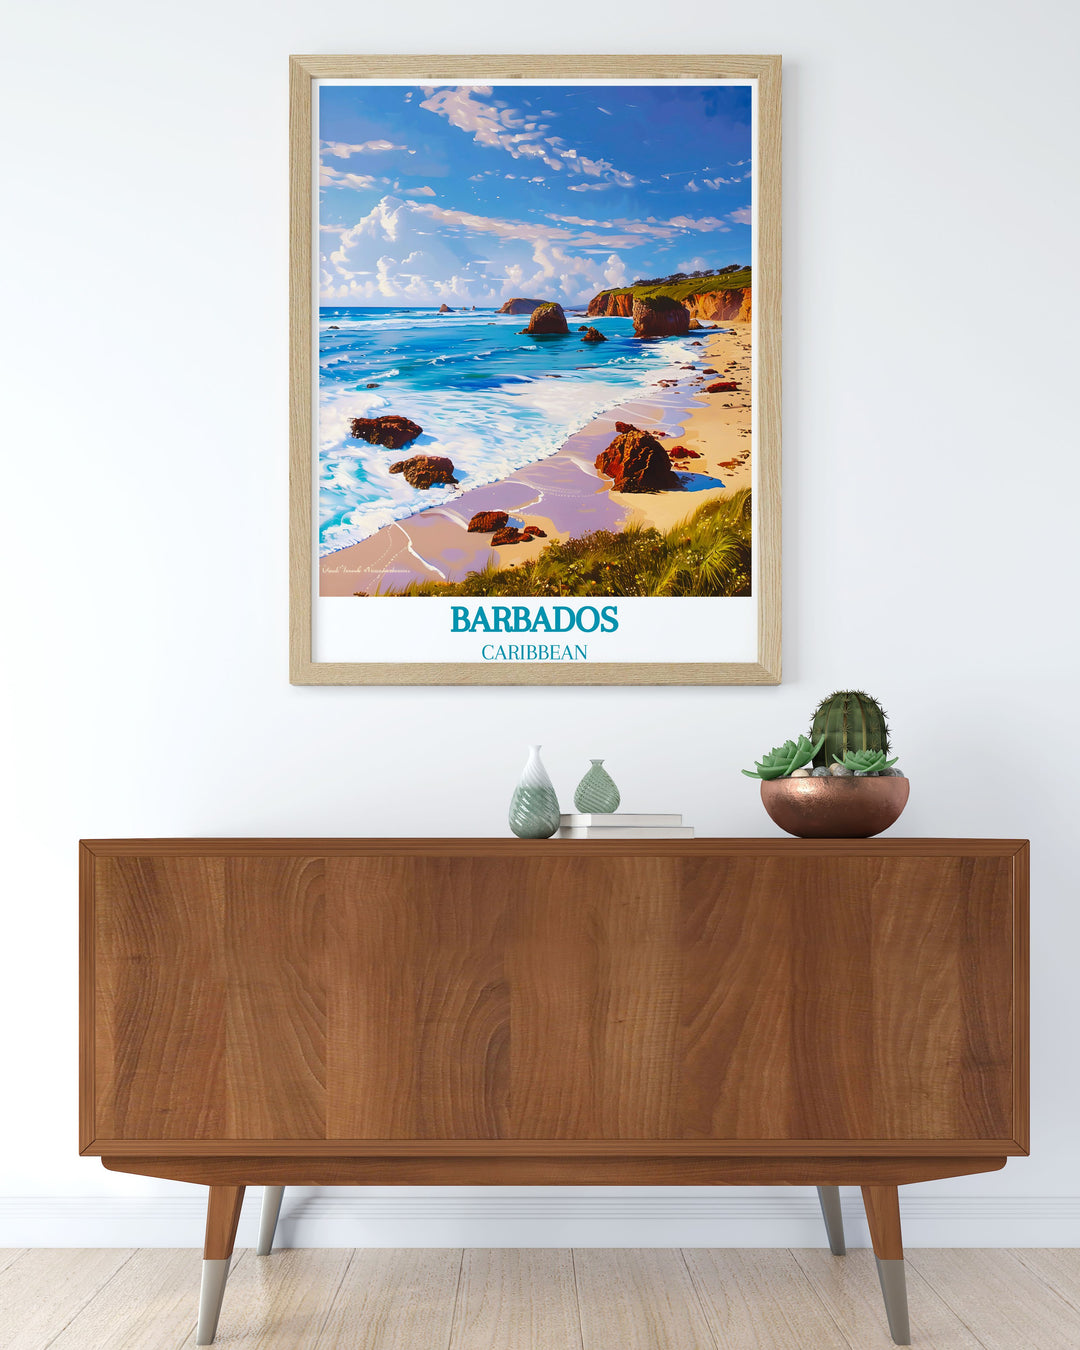 Barbados travel poster showcasing the lush landscapes and pristine beaches of the island, perfect for inspiring wanderlust and a sense of adventure in any space.